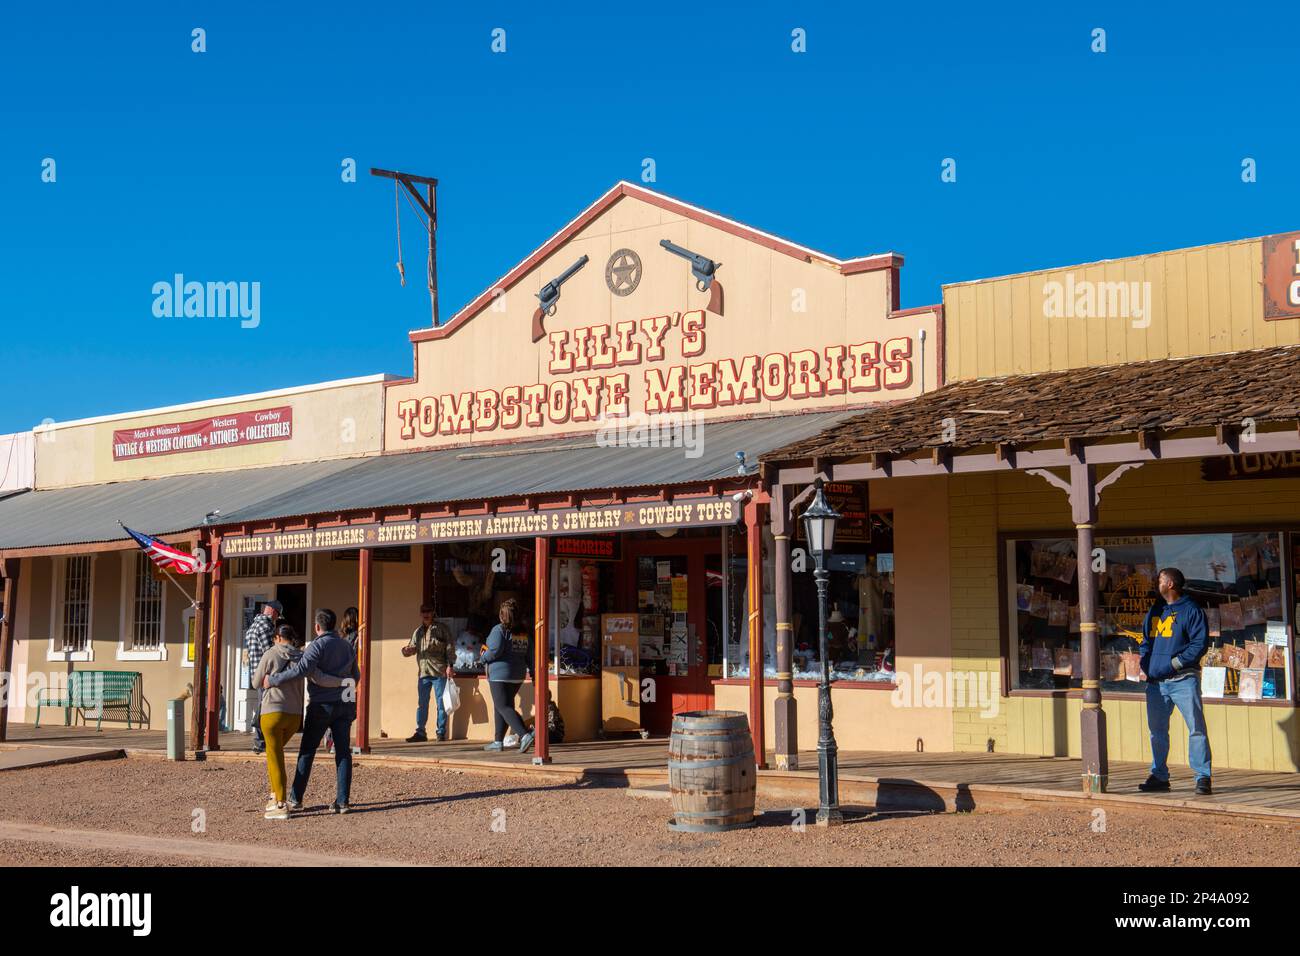 Lilly's Tombstone Memories store with Old West style at 514 E Allen Street in downtown Tombstone, Arizona AZ, USA. Stock Photo